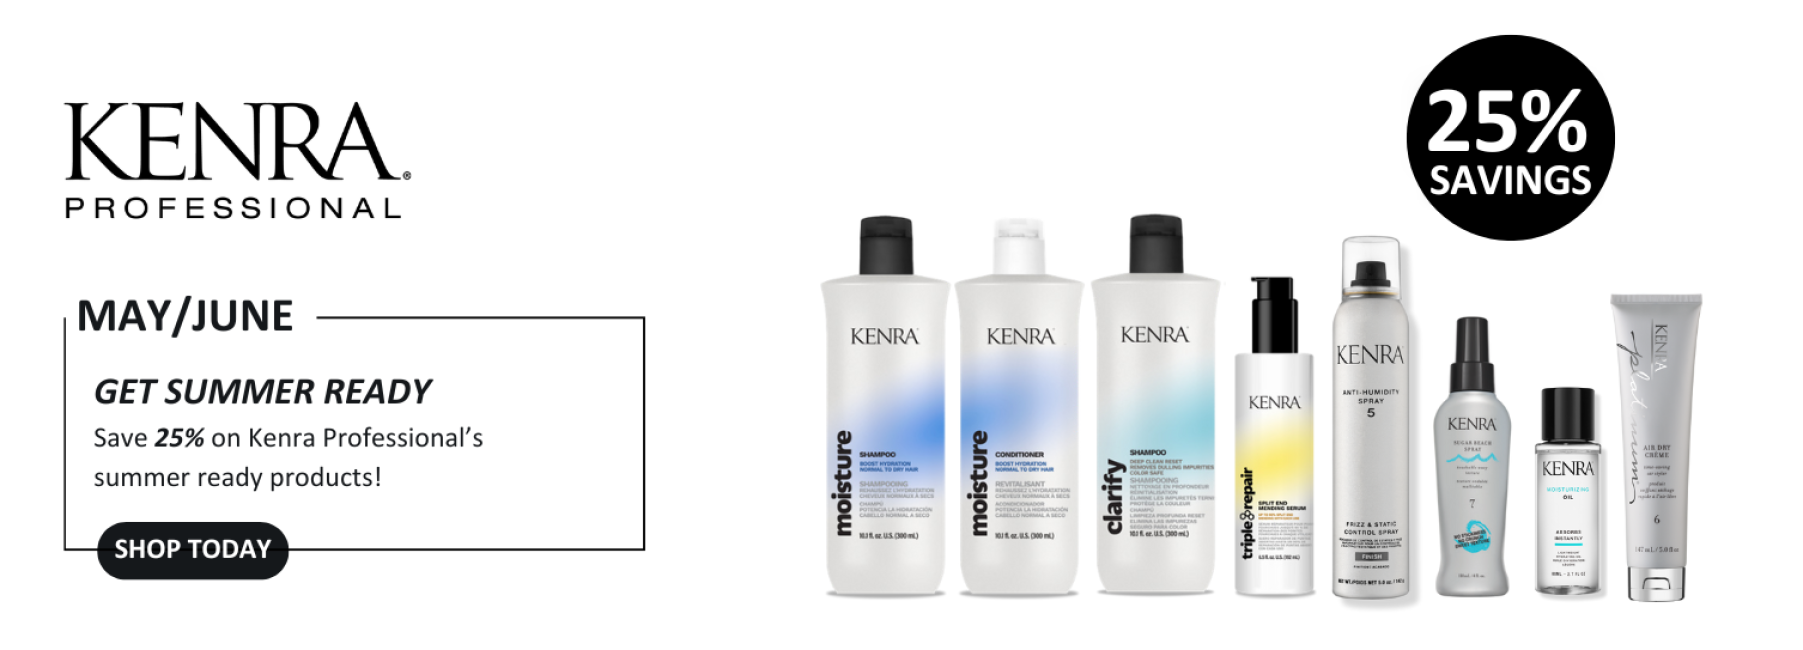 KENRA SUMMER READY PRODUCTS OFFER MAY